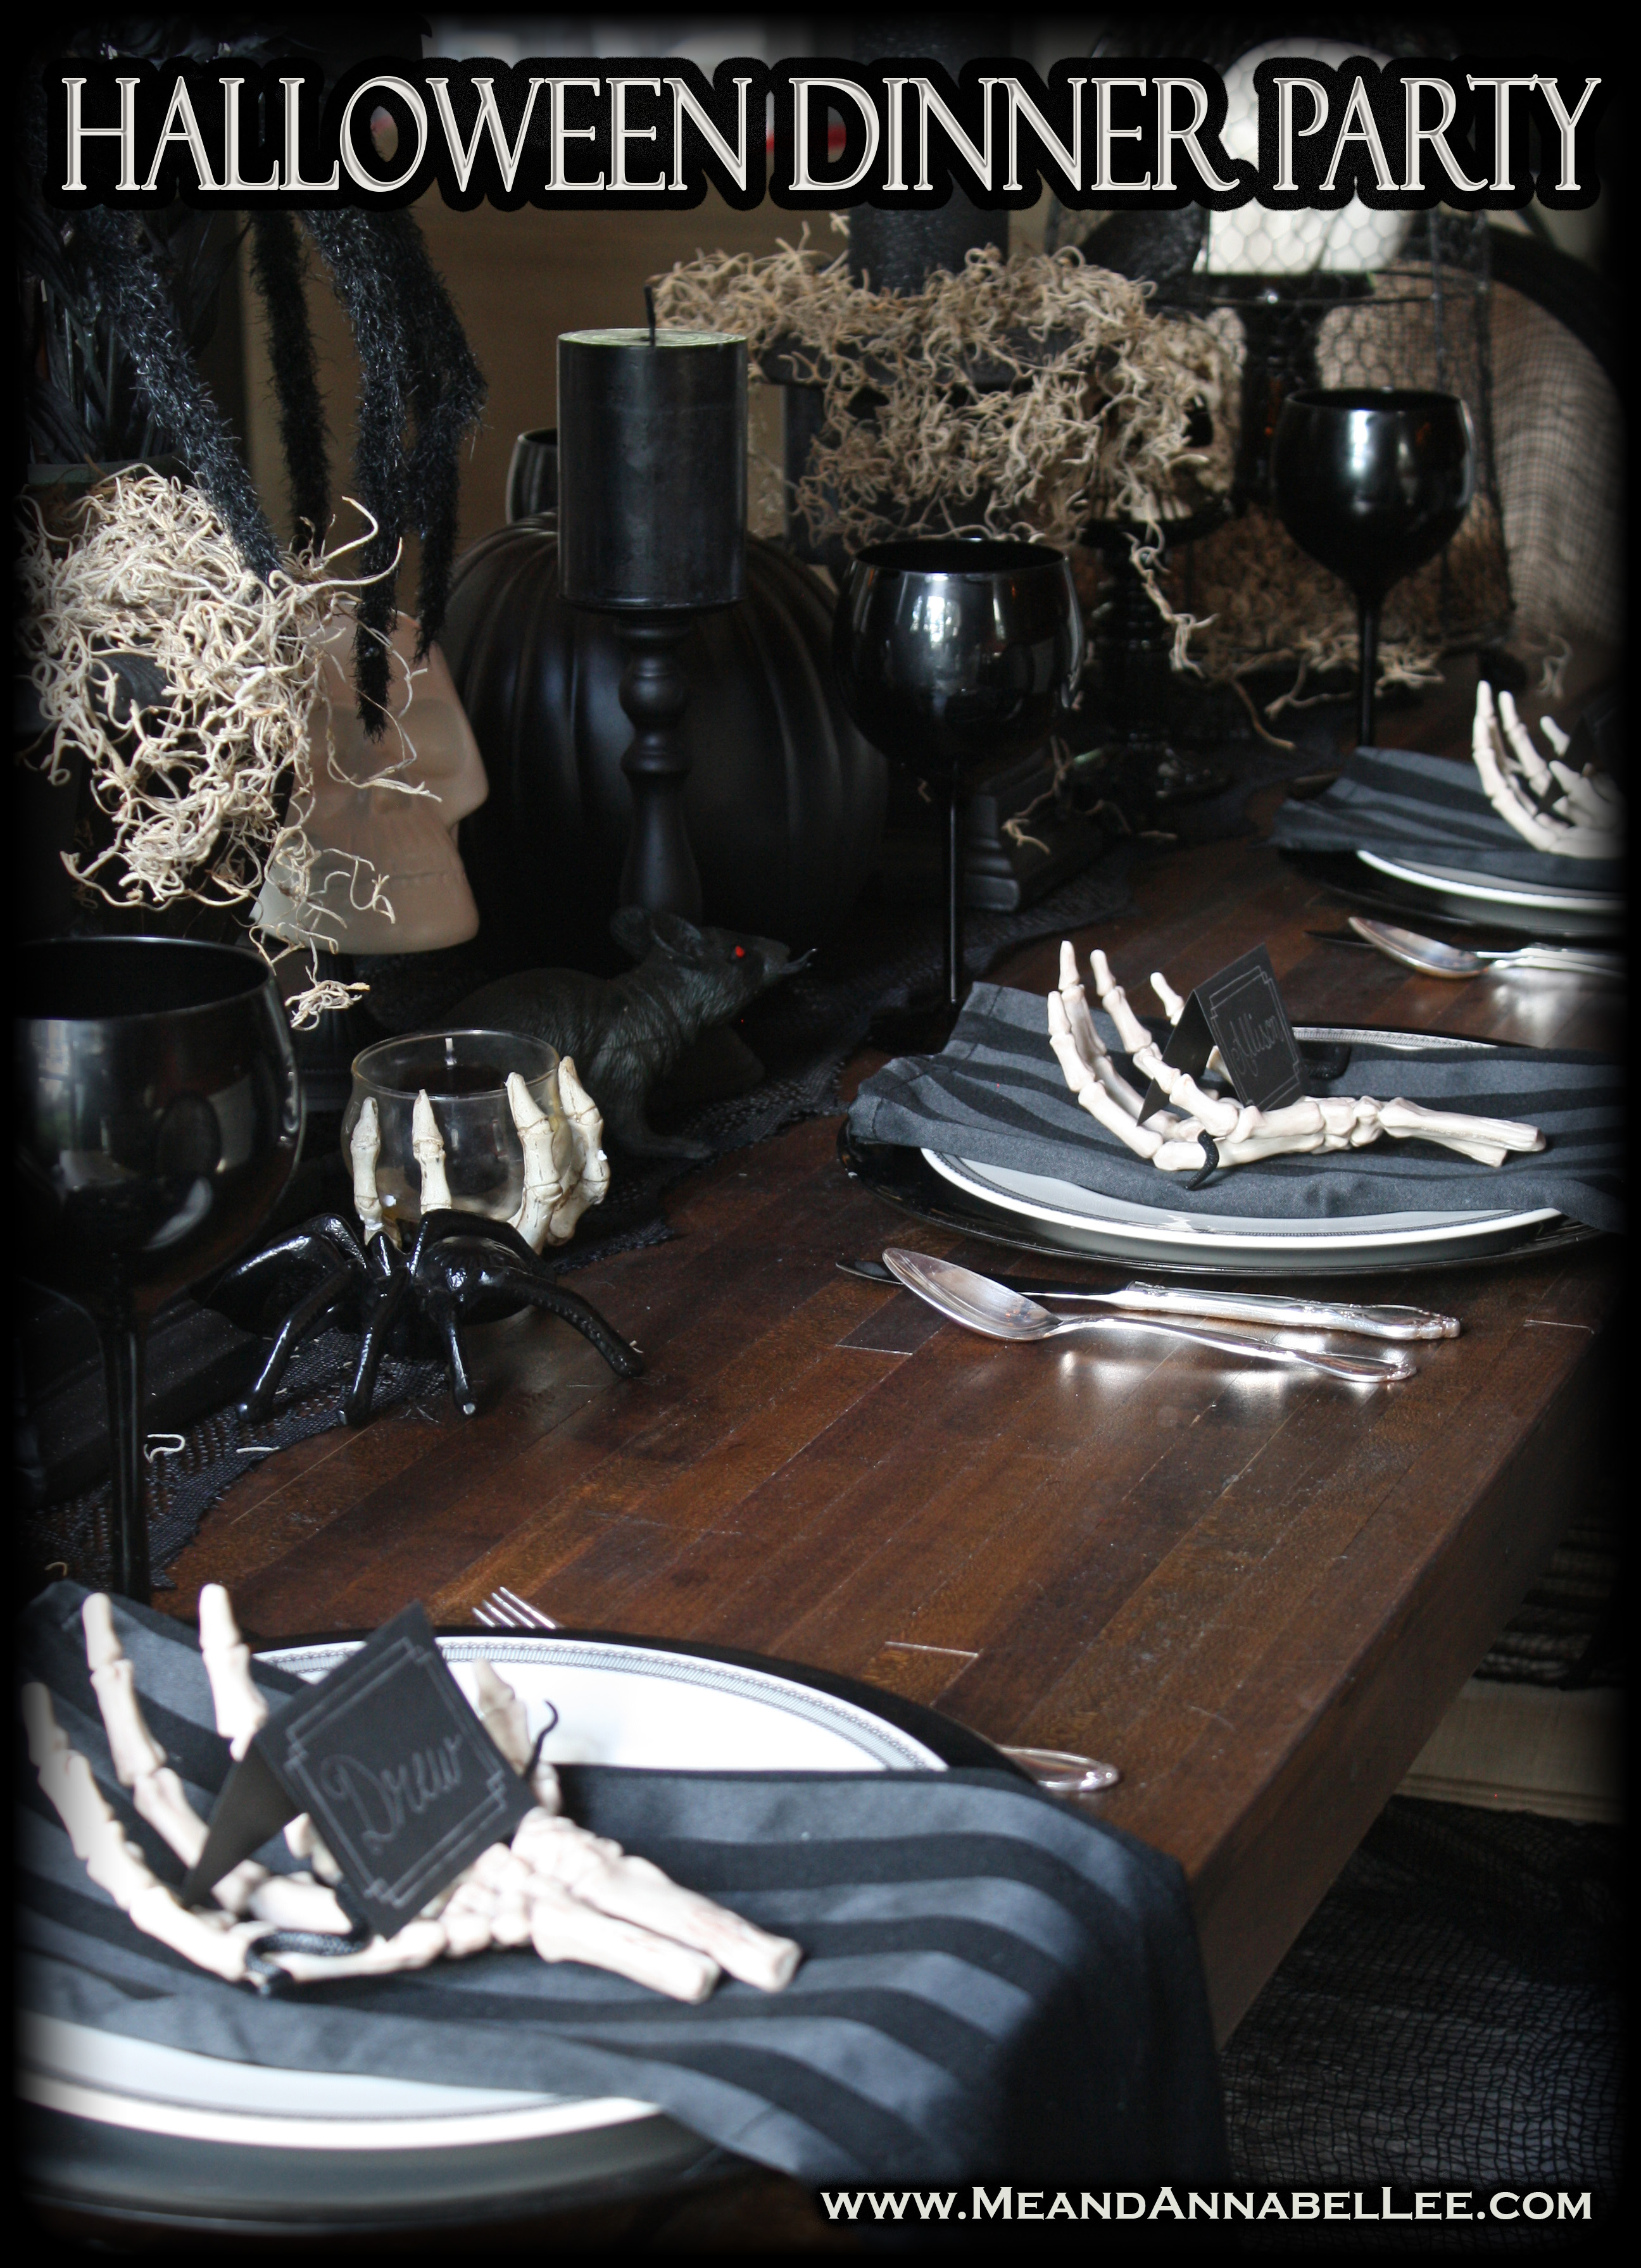 Halloween Dinner Party | Gothic Table | www.MeandAnnabelLee.com